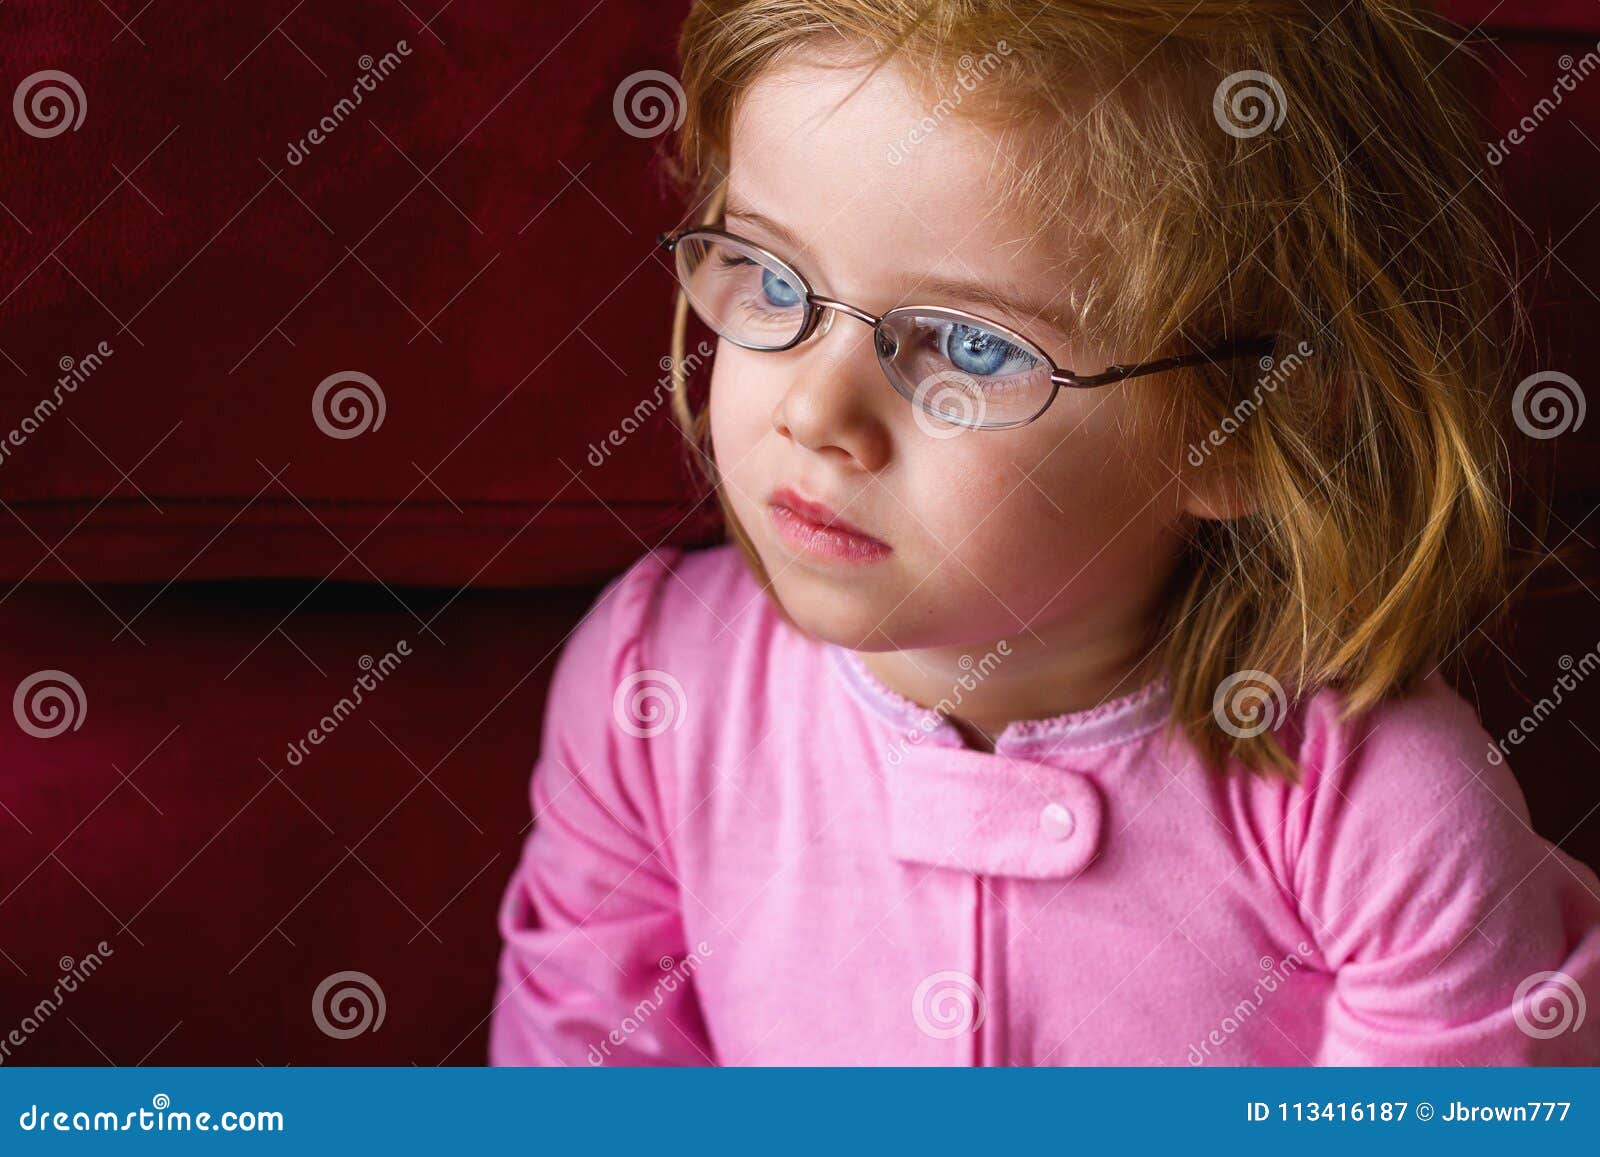 sick girl with very thick glasses and magnified blue eyes